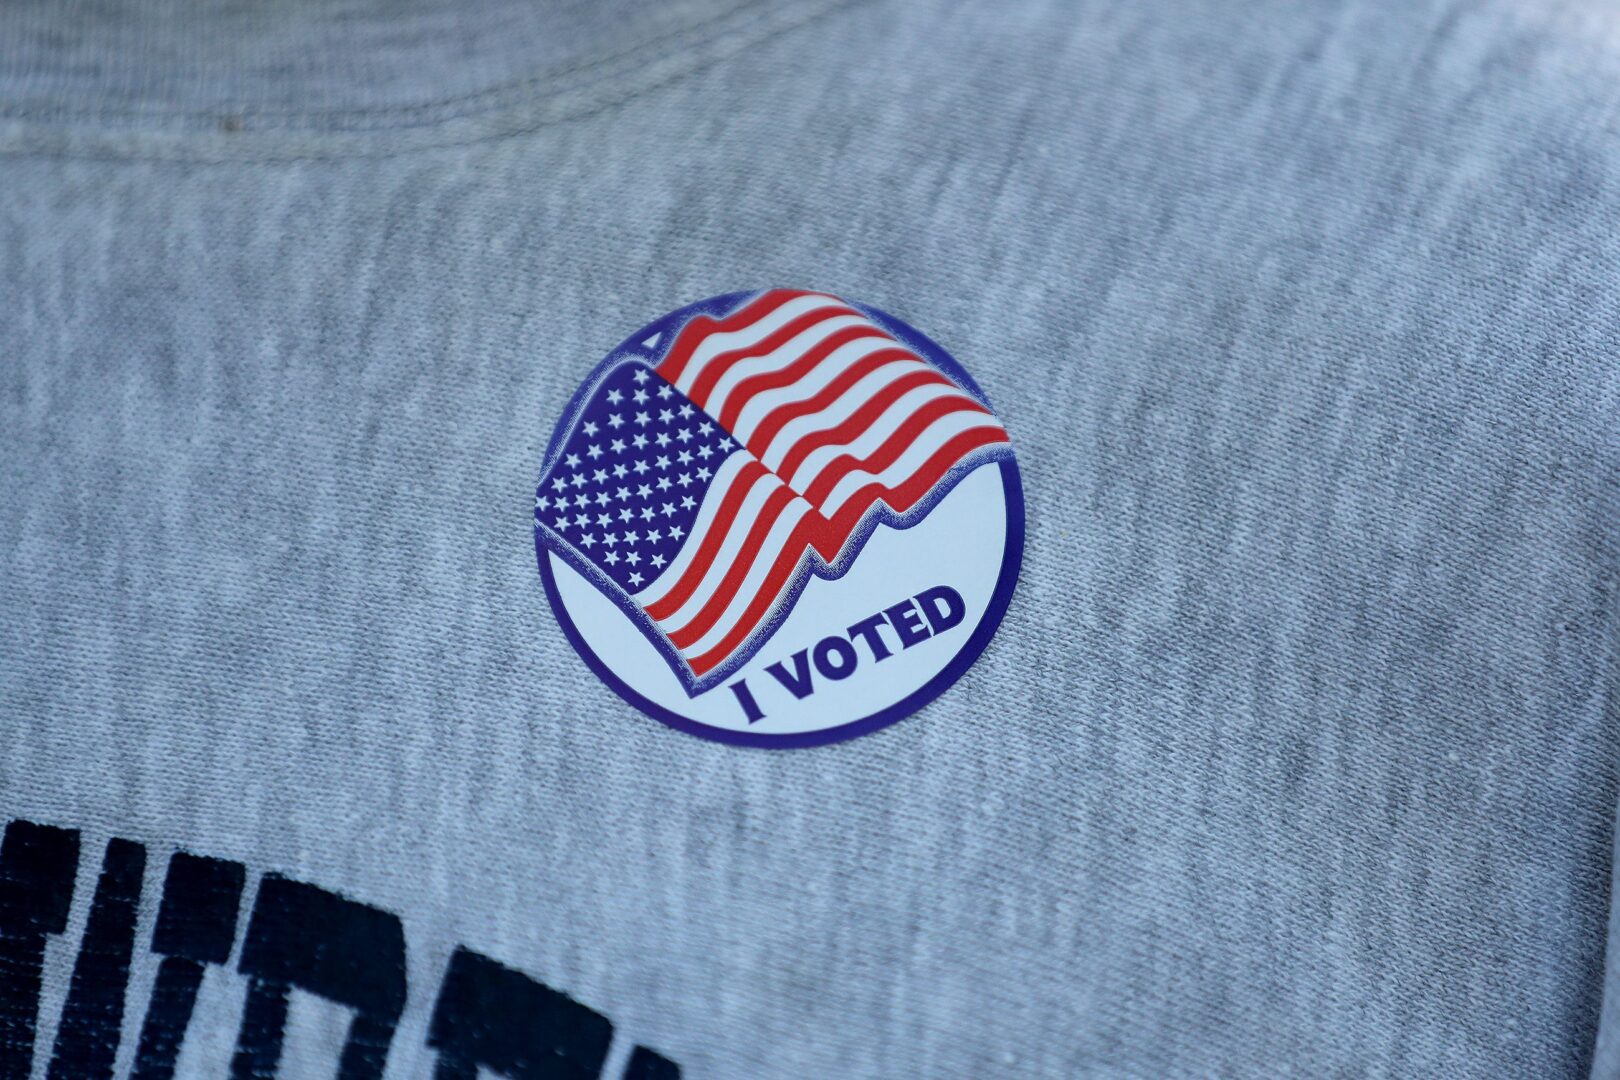 Polls open at 7 a.m and close at 8 p.m. As long as you are in line to vote by 8 p.m., you are entitled to cast a ballot.